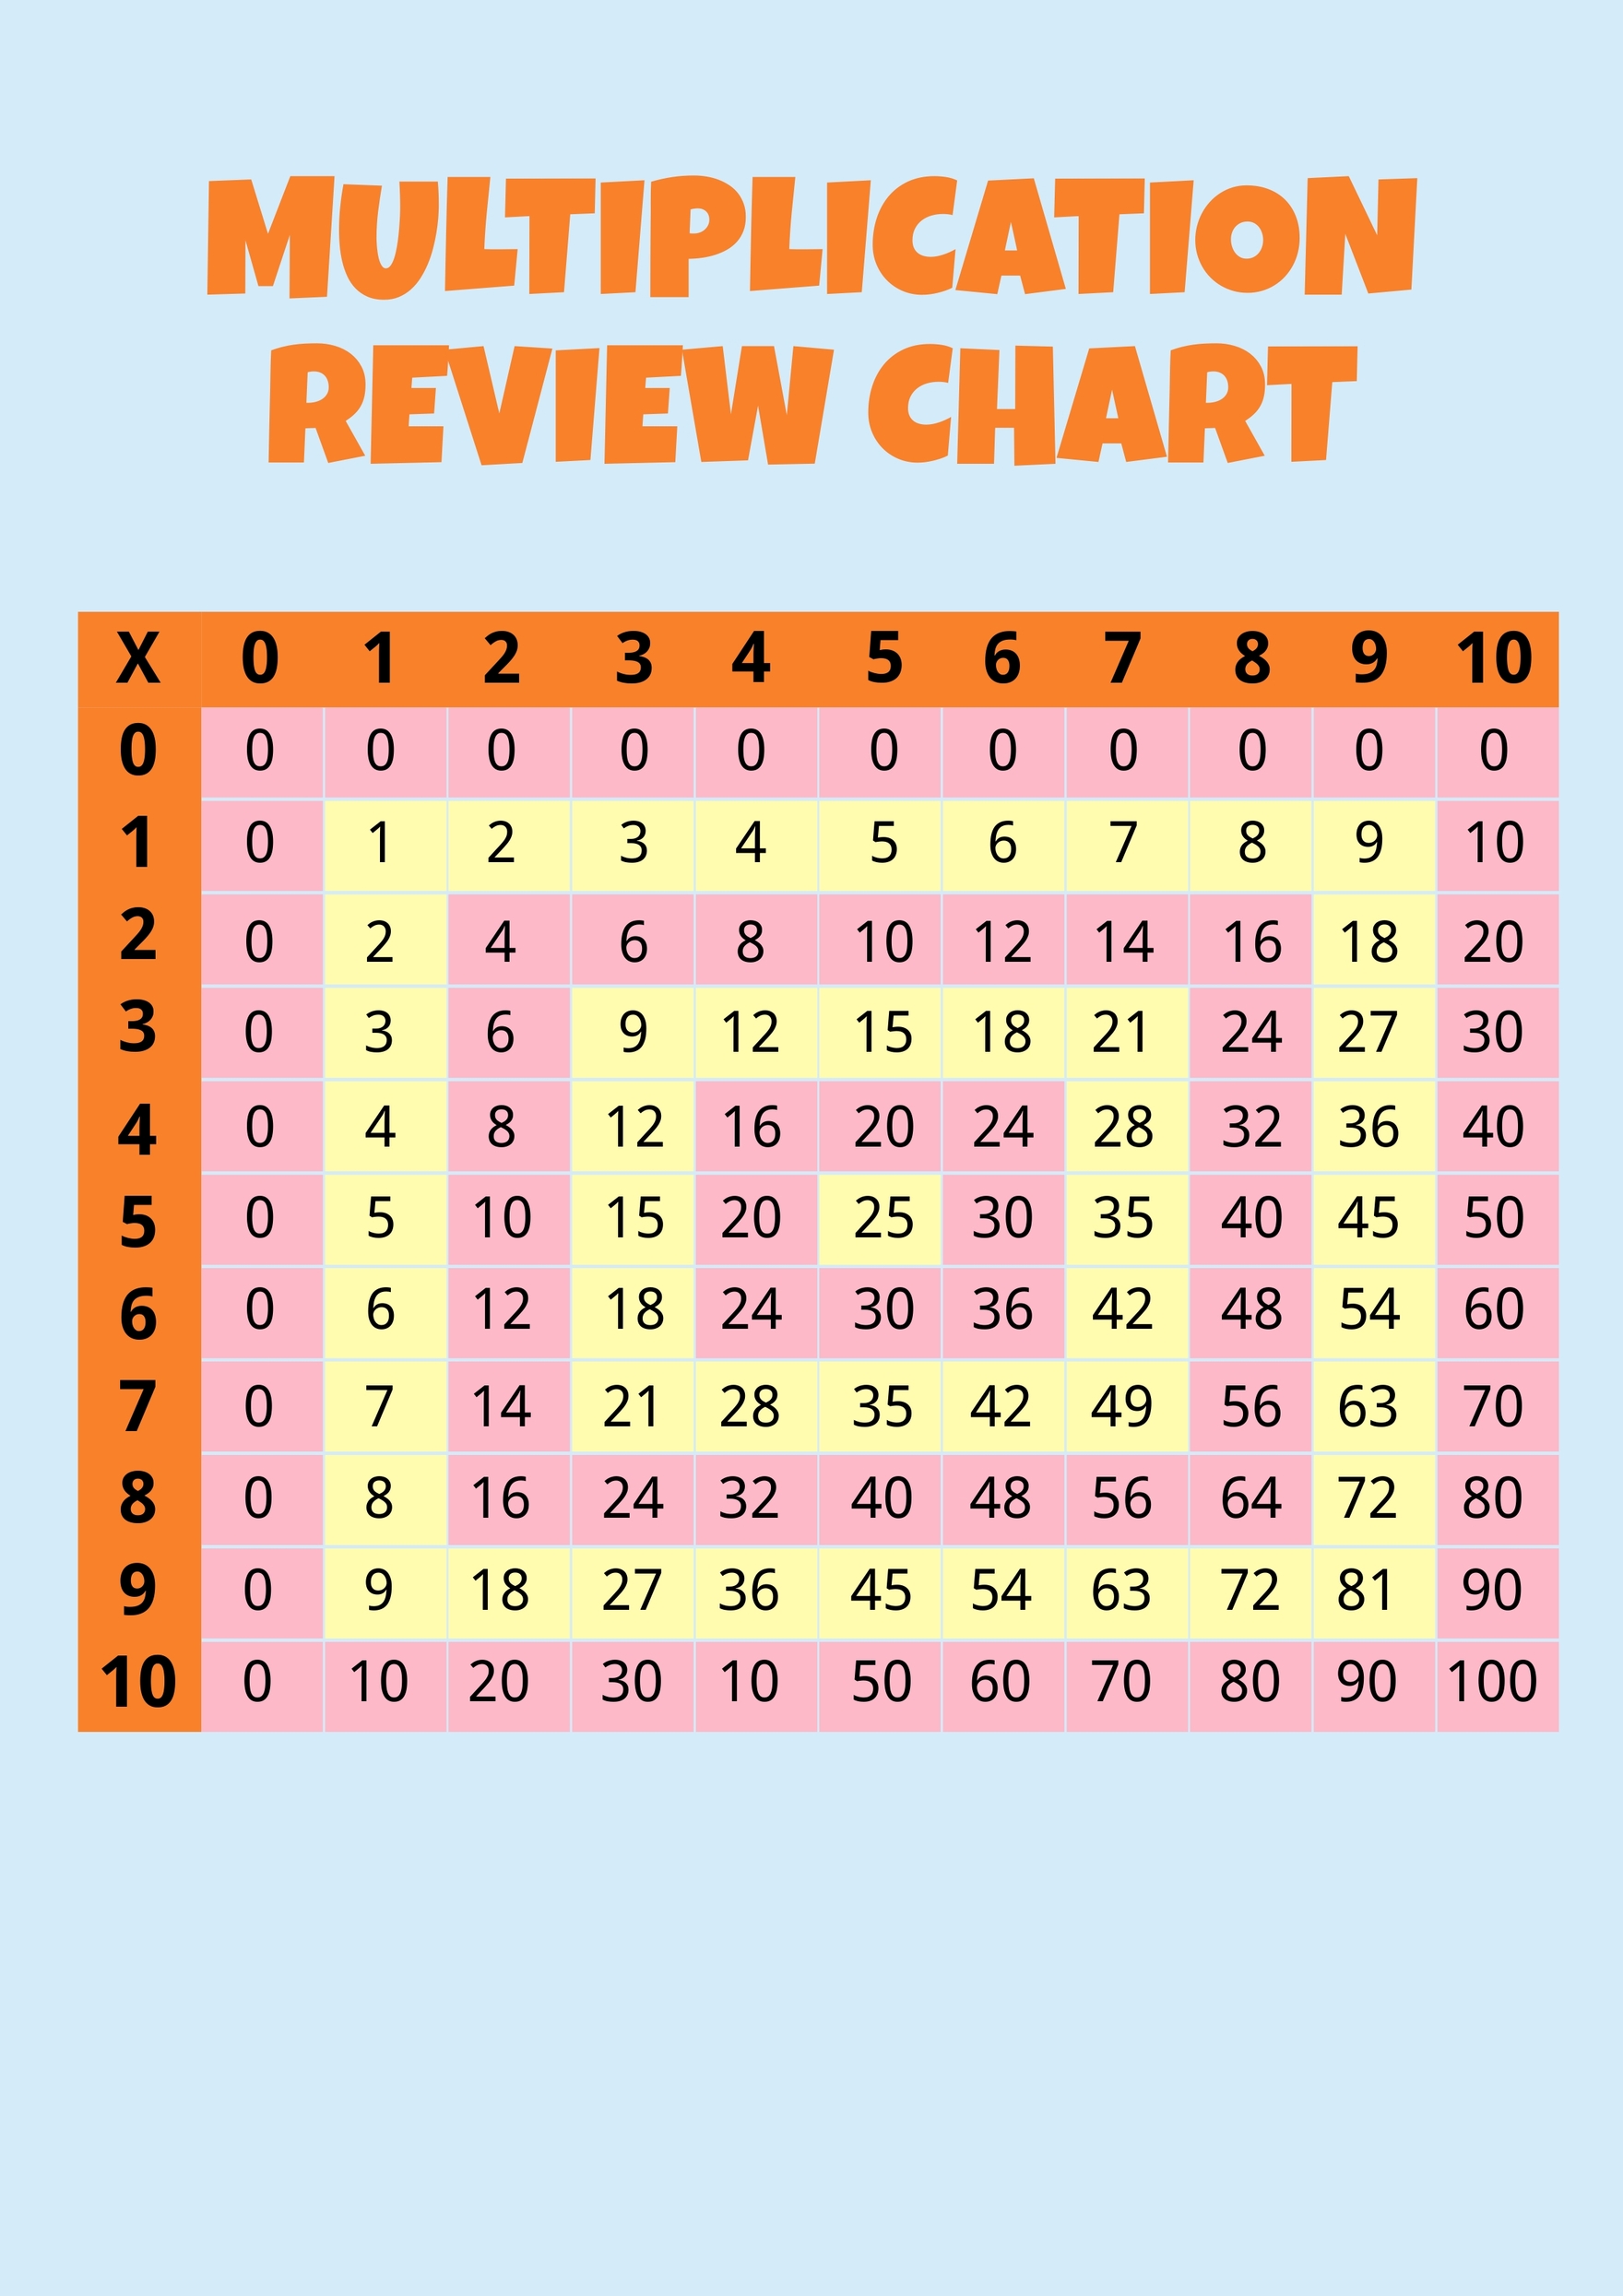 free-multiplication-review-chart-template-download-in-pdf